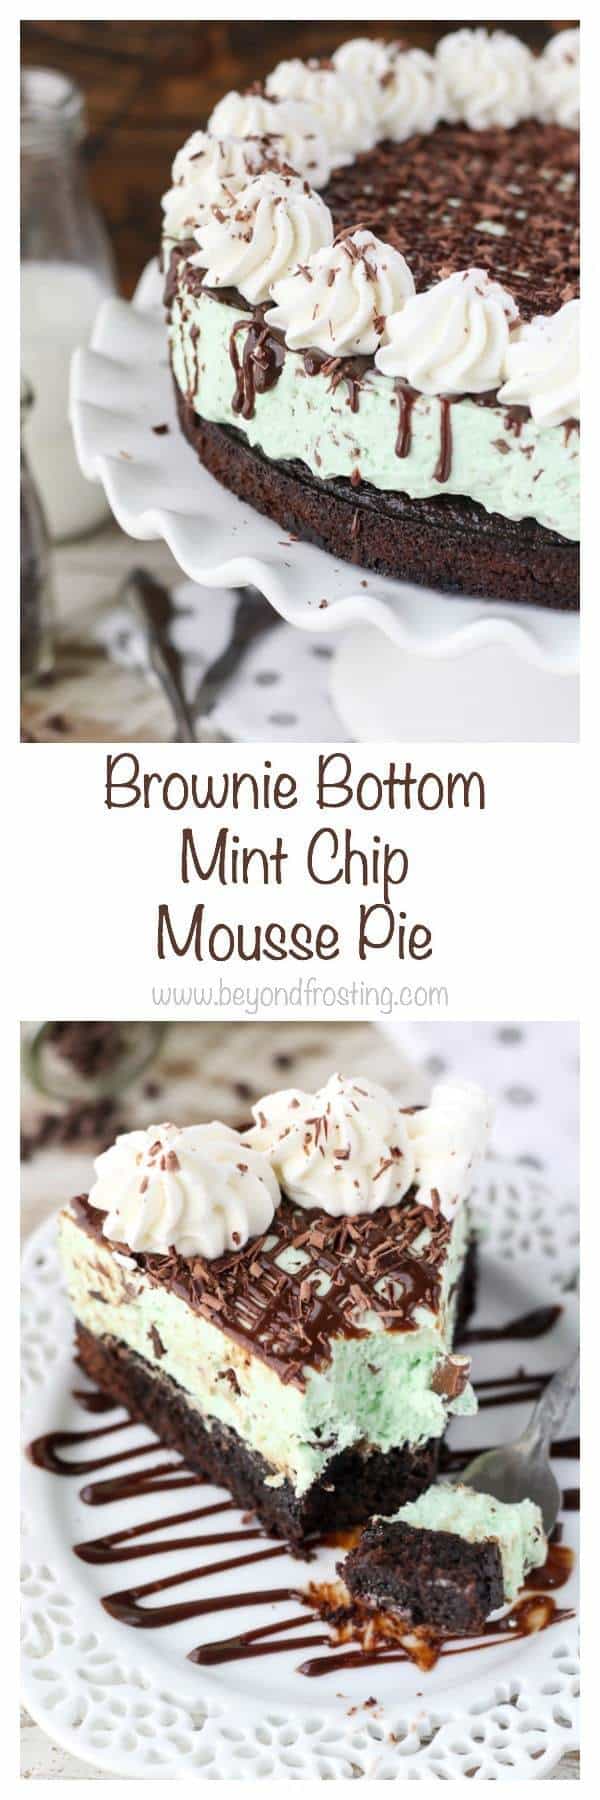  This Brownie Bottom Mint Chip Mousse Pie starts with a fudgy chocolate brownie layer and it’s topped with a light and airy mint chip mousse.